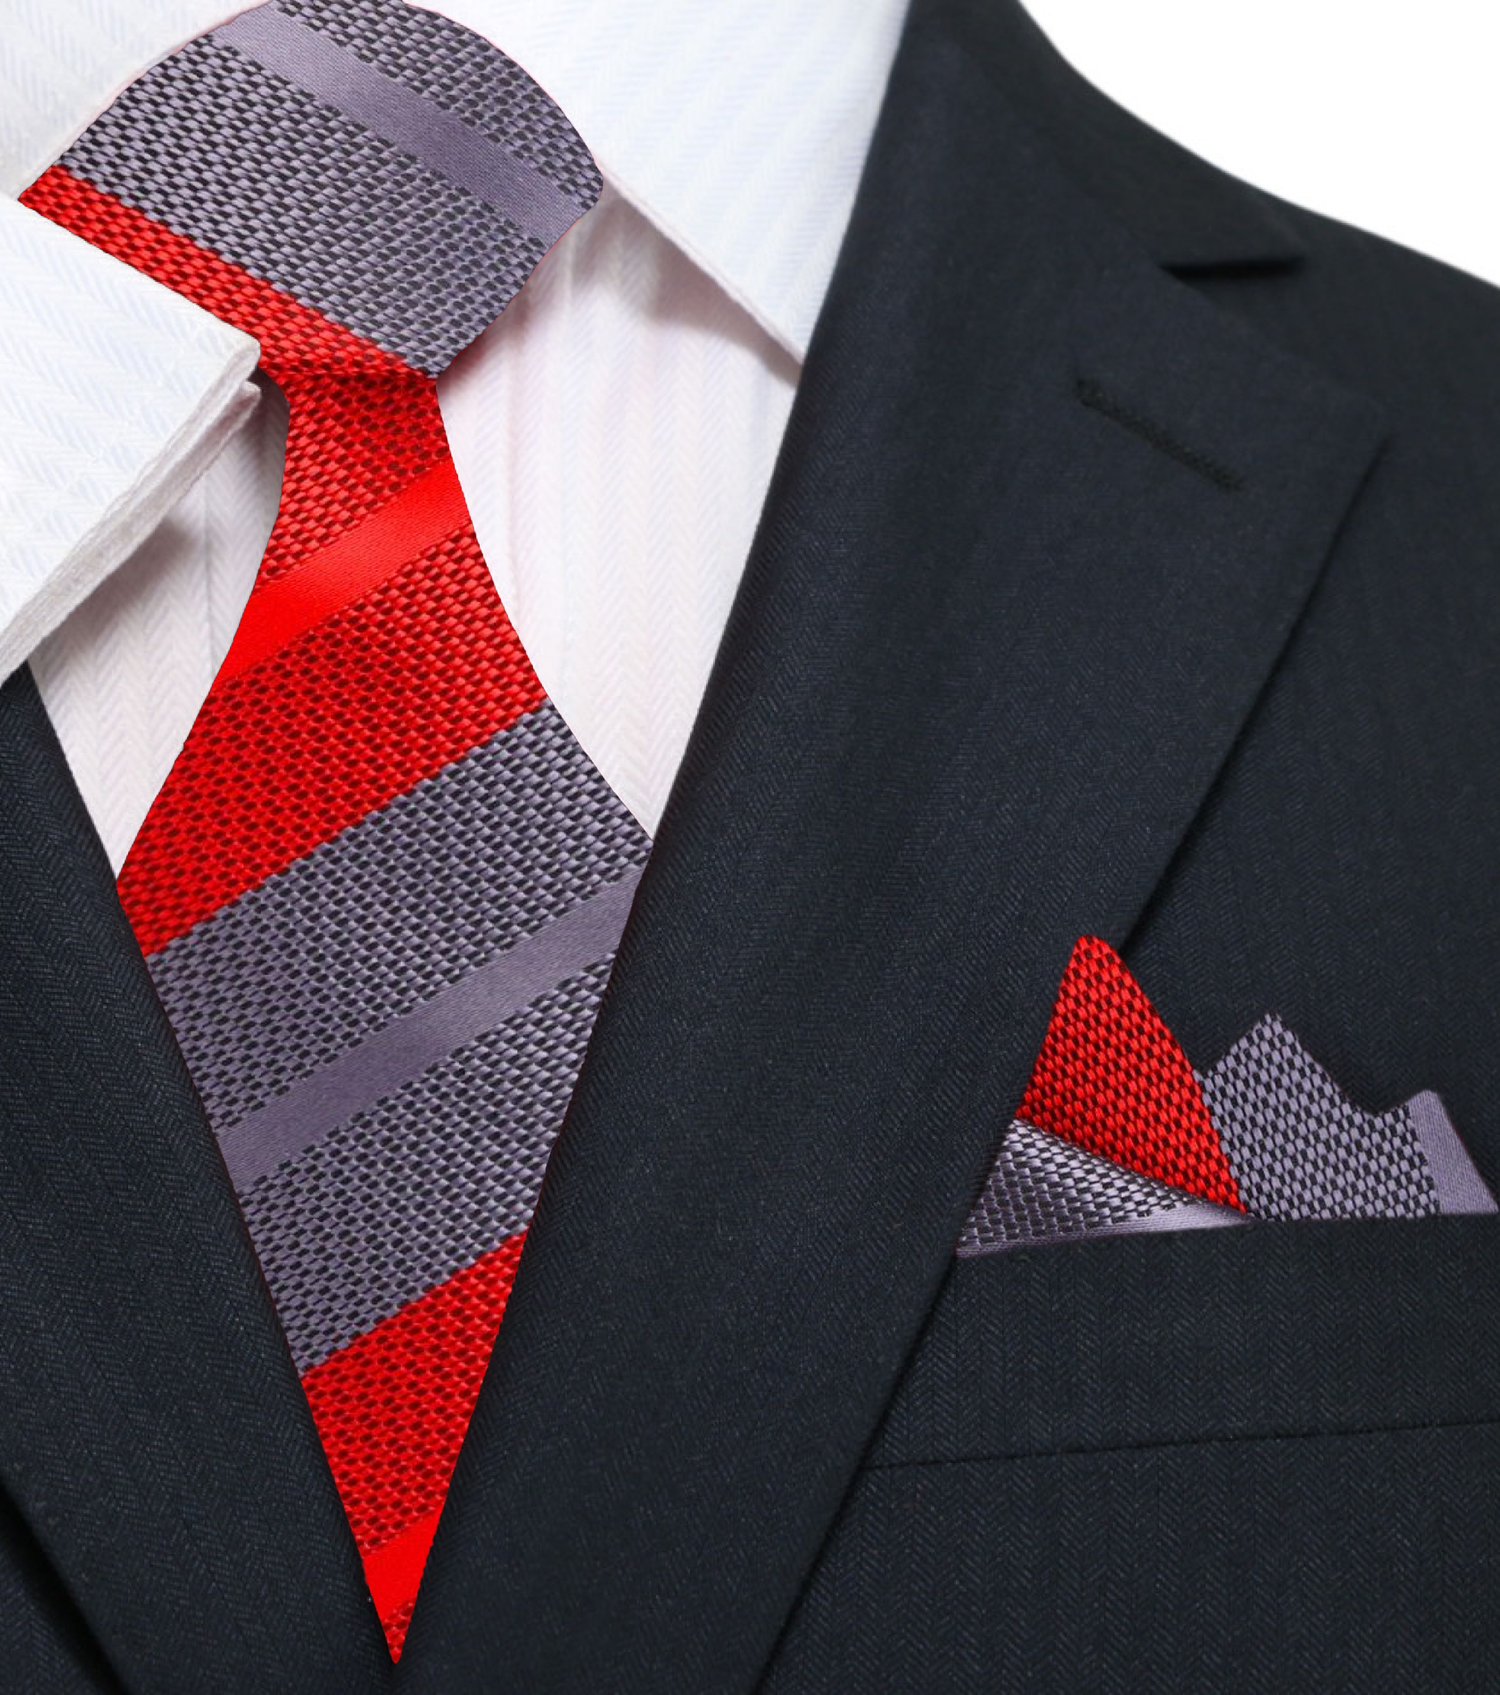 Main View: Red/Grey Stripe Tie and Pocket Square